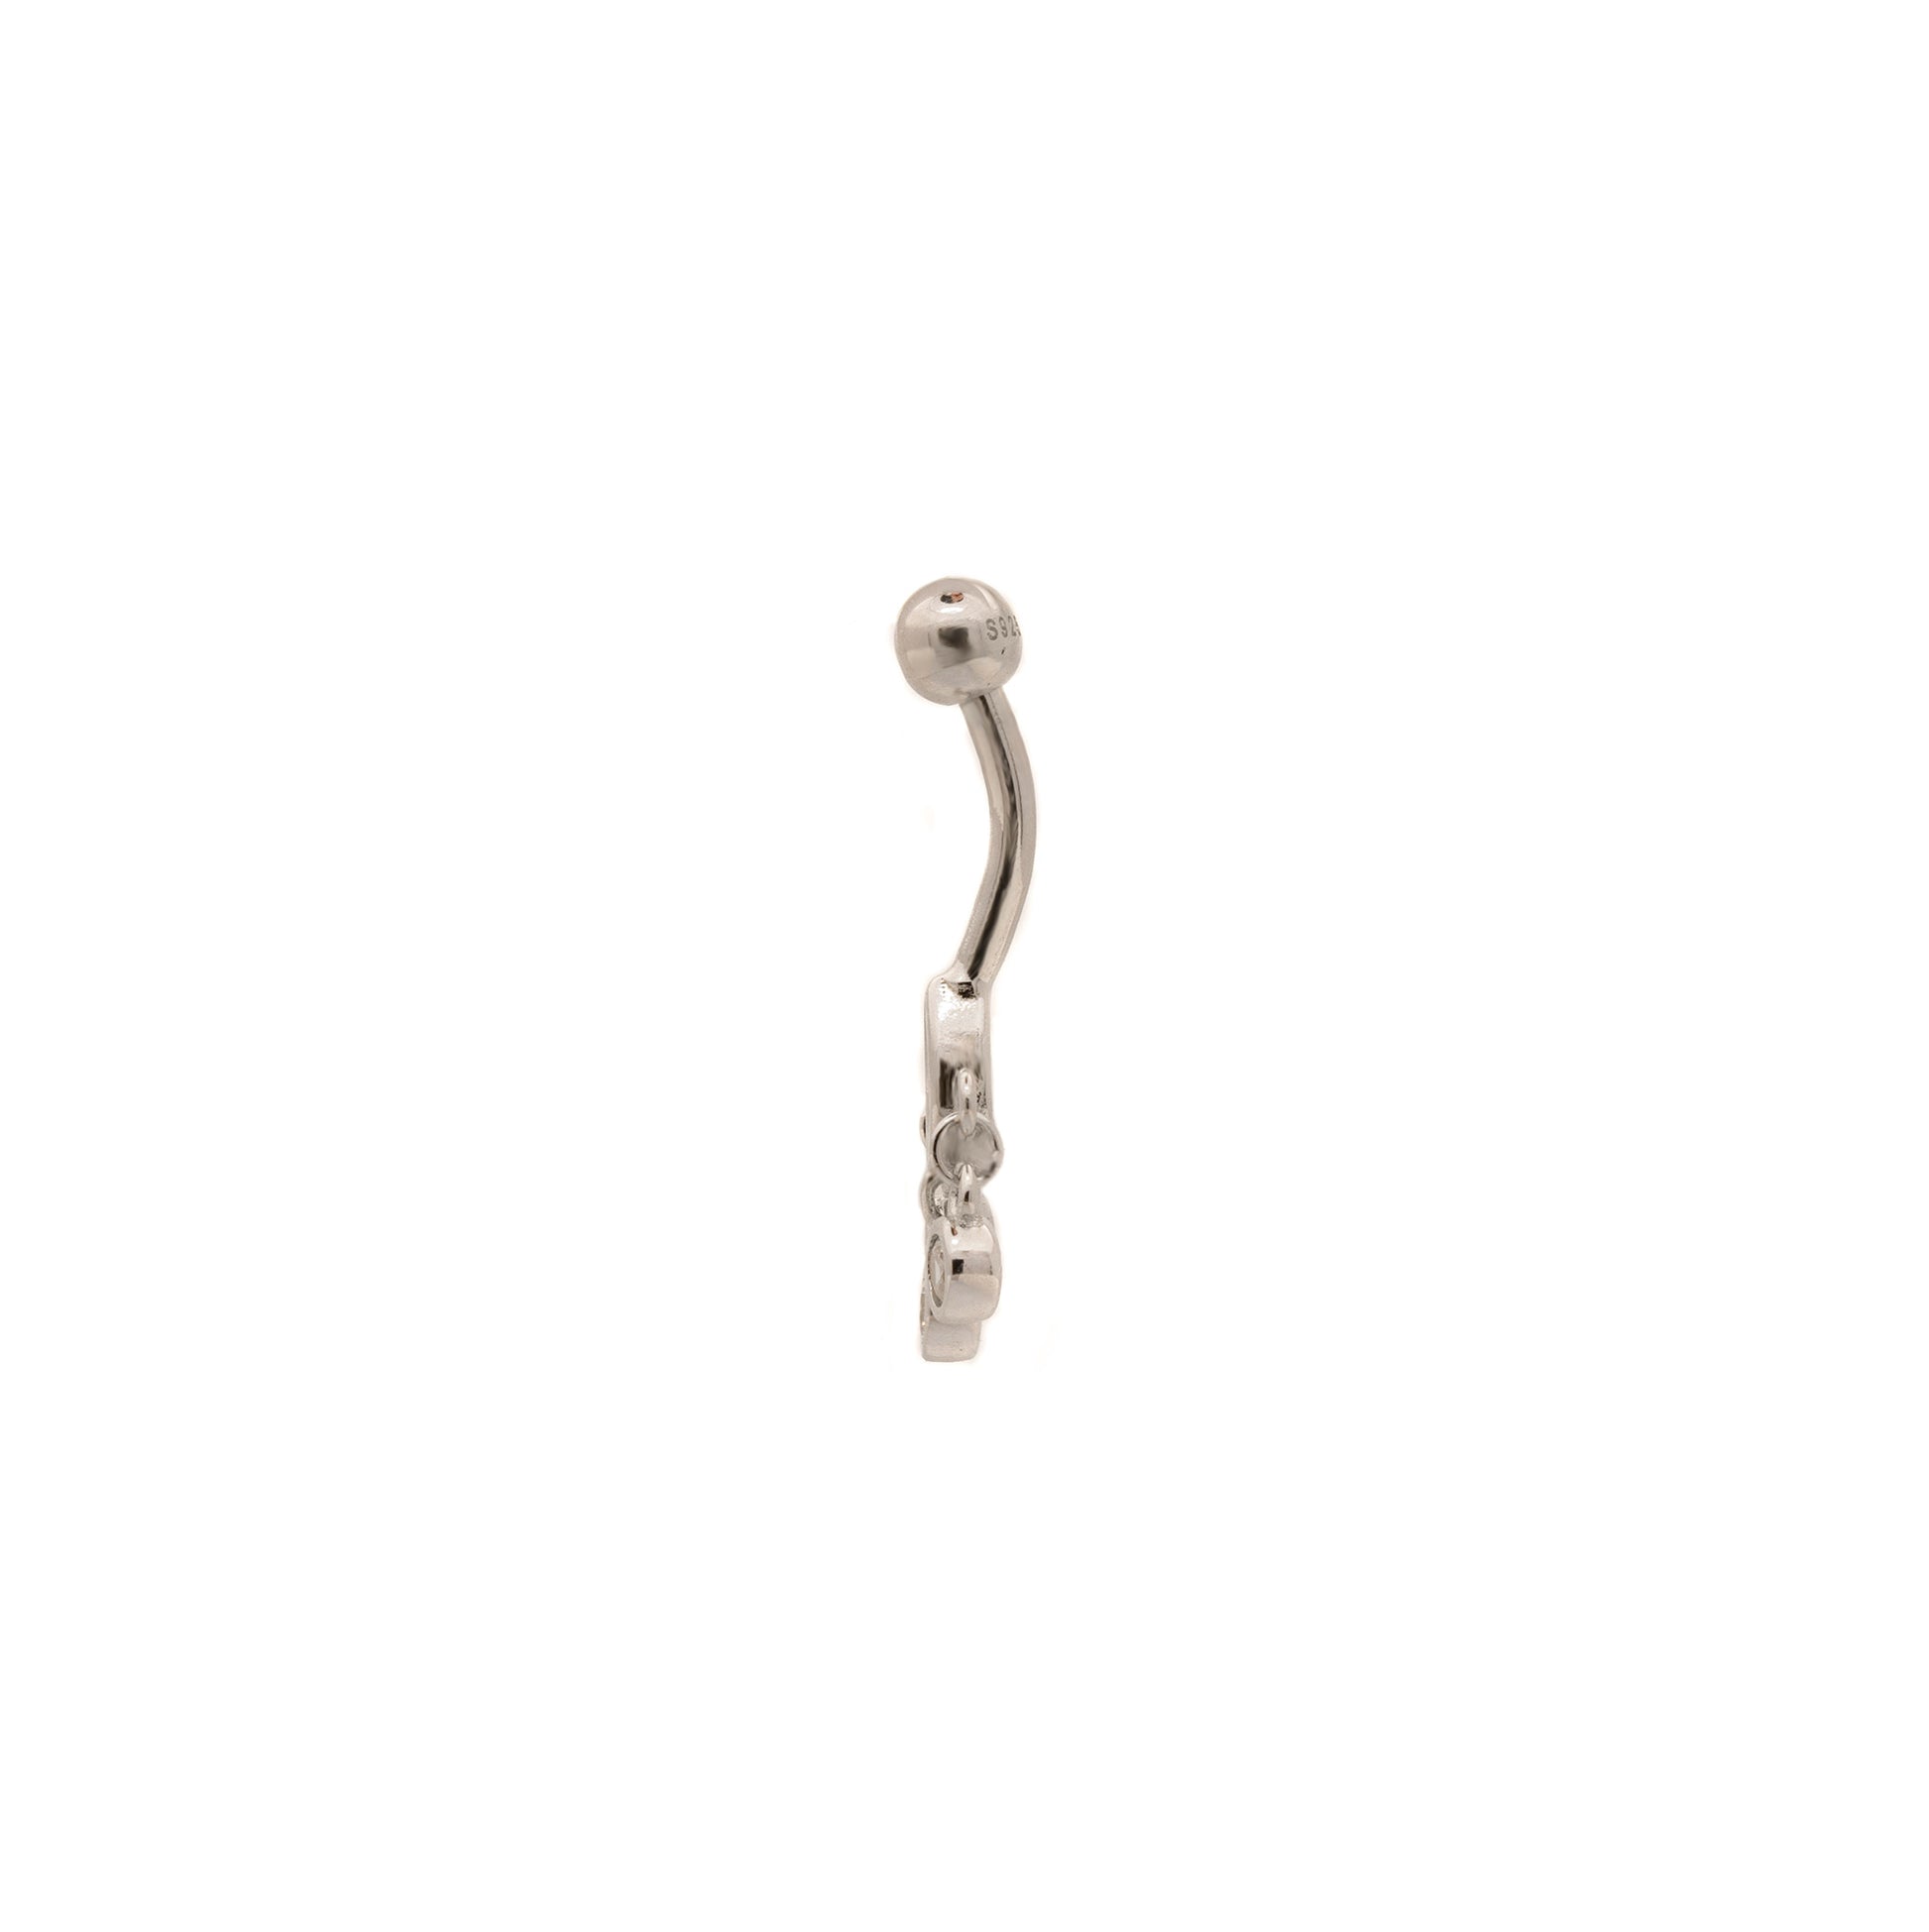 Solid 925 Silver | Extra Flat Lower Belly Ring Chandelier with Dangles Charmes | 14G 6mm 1/4" 8mm 5/16" 10mm 3/8" 12mm 1/2" 14mm 9/16" - Sturdy South